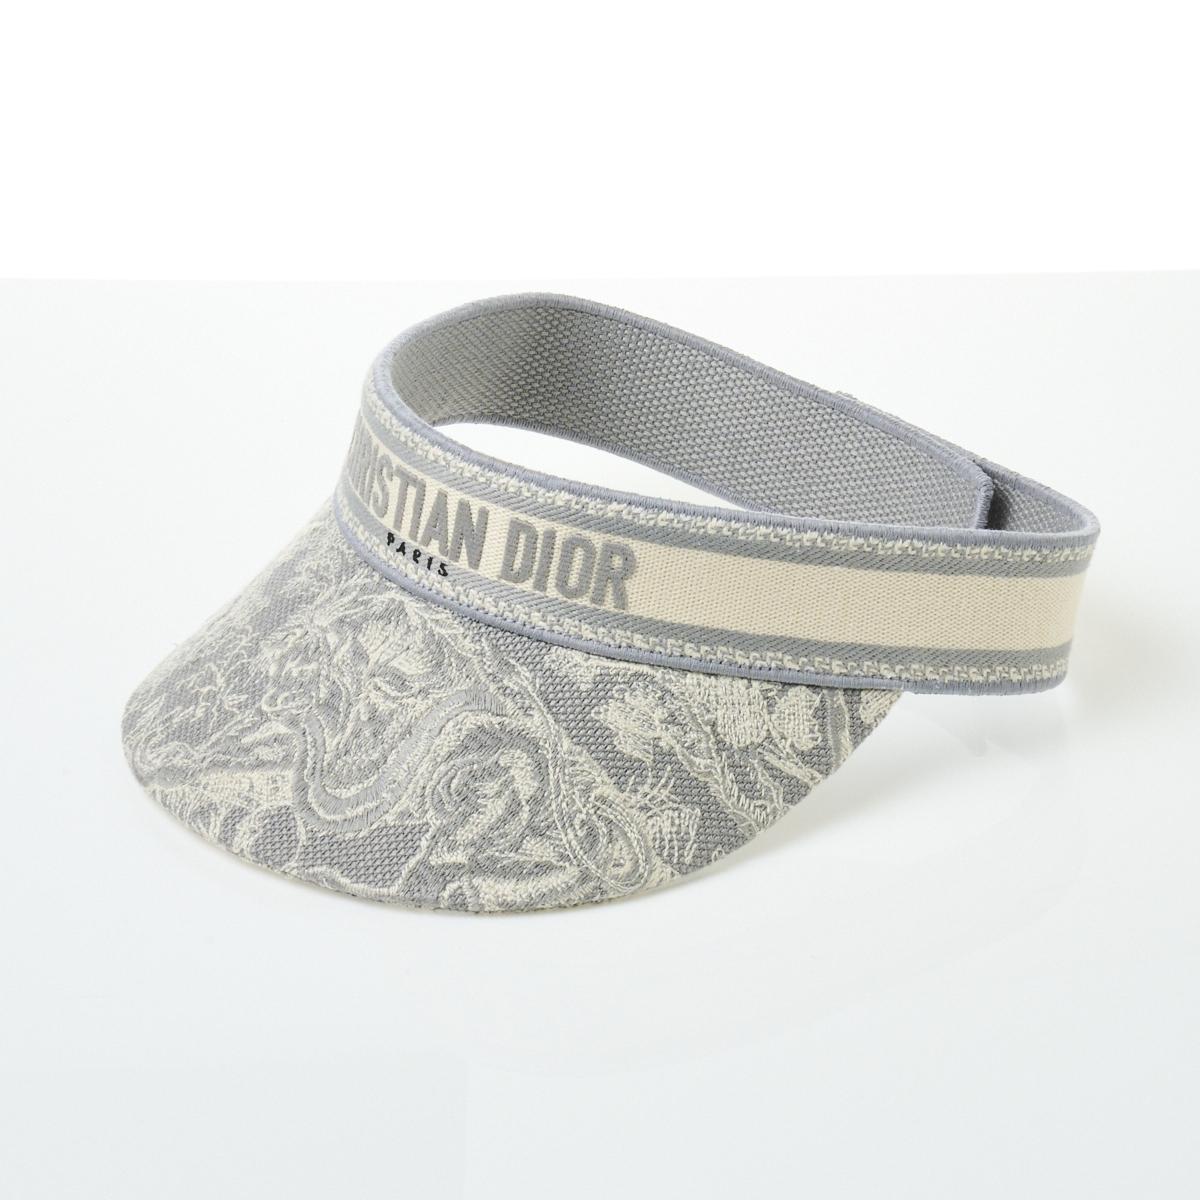 DSmash Toile de Jouy Sauvage Visor Pink and Gray Embroidery  DIOR